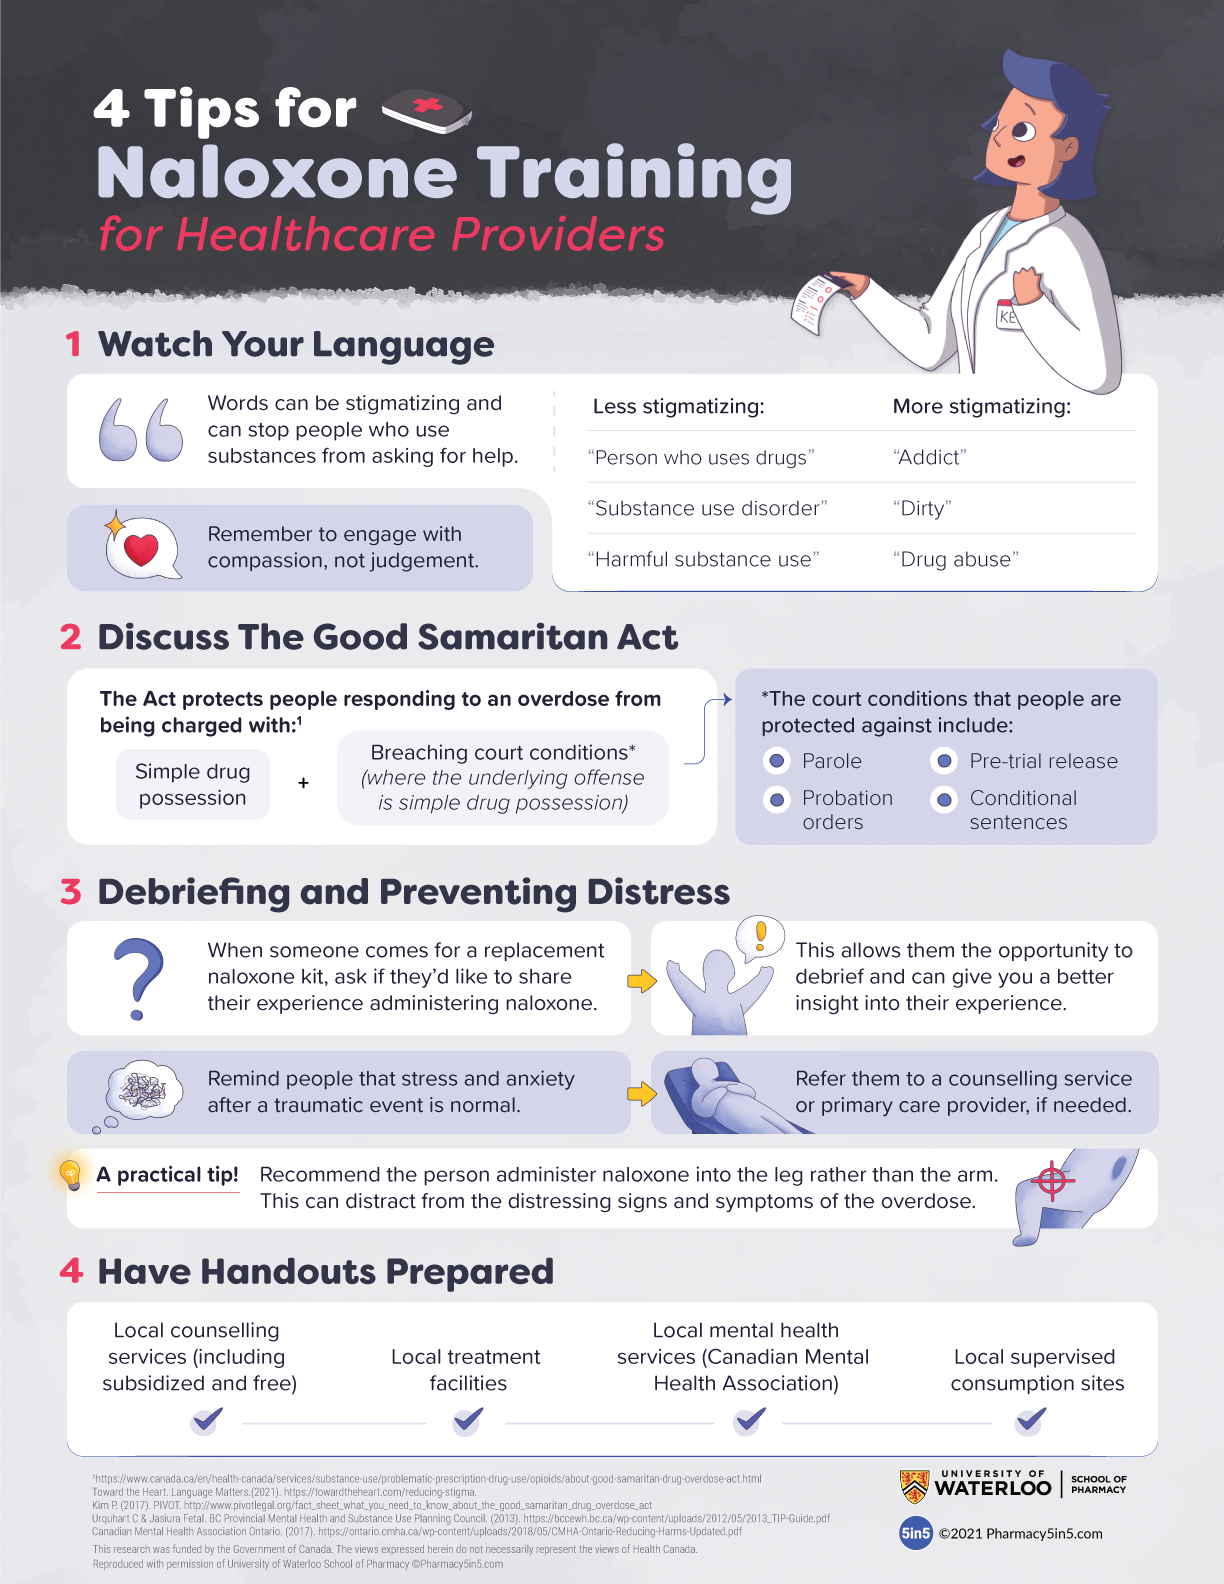 Four tips for naloxone training for health-care providers (downloadable PDF below)